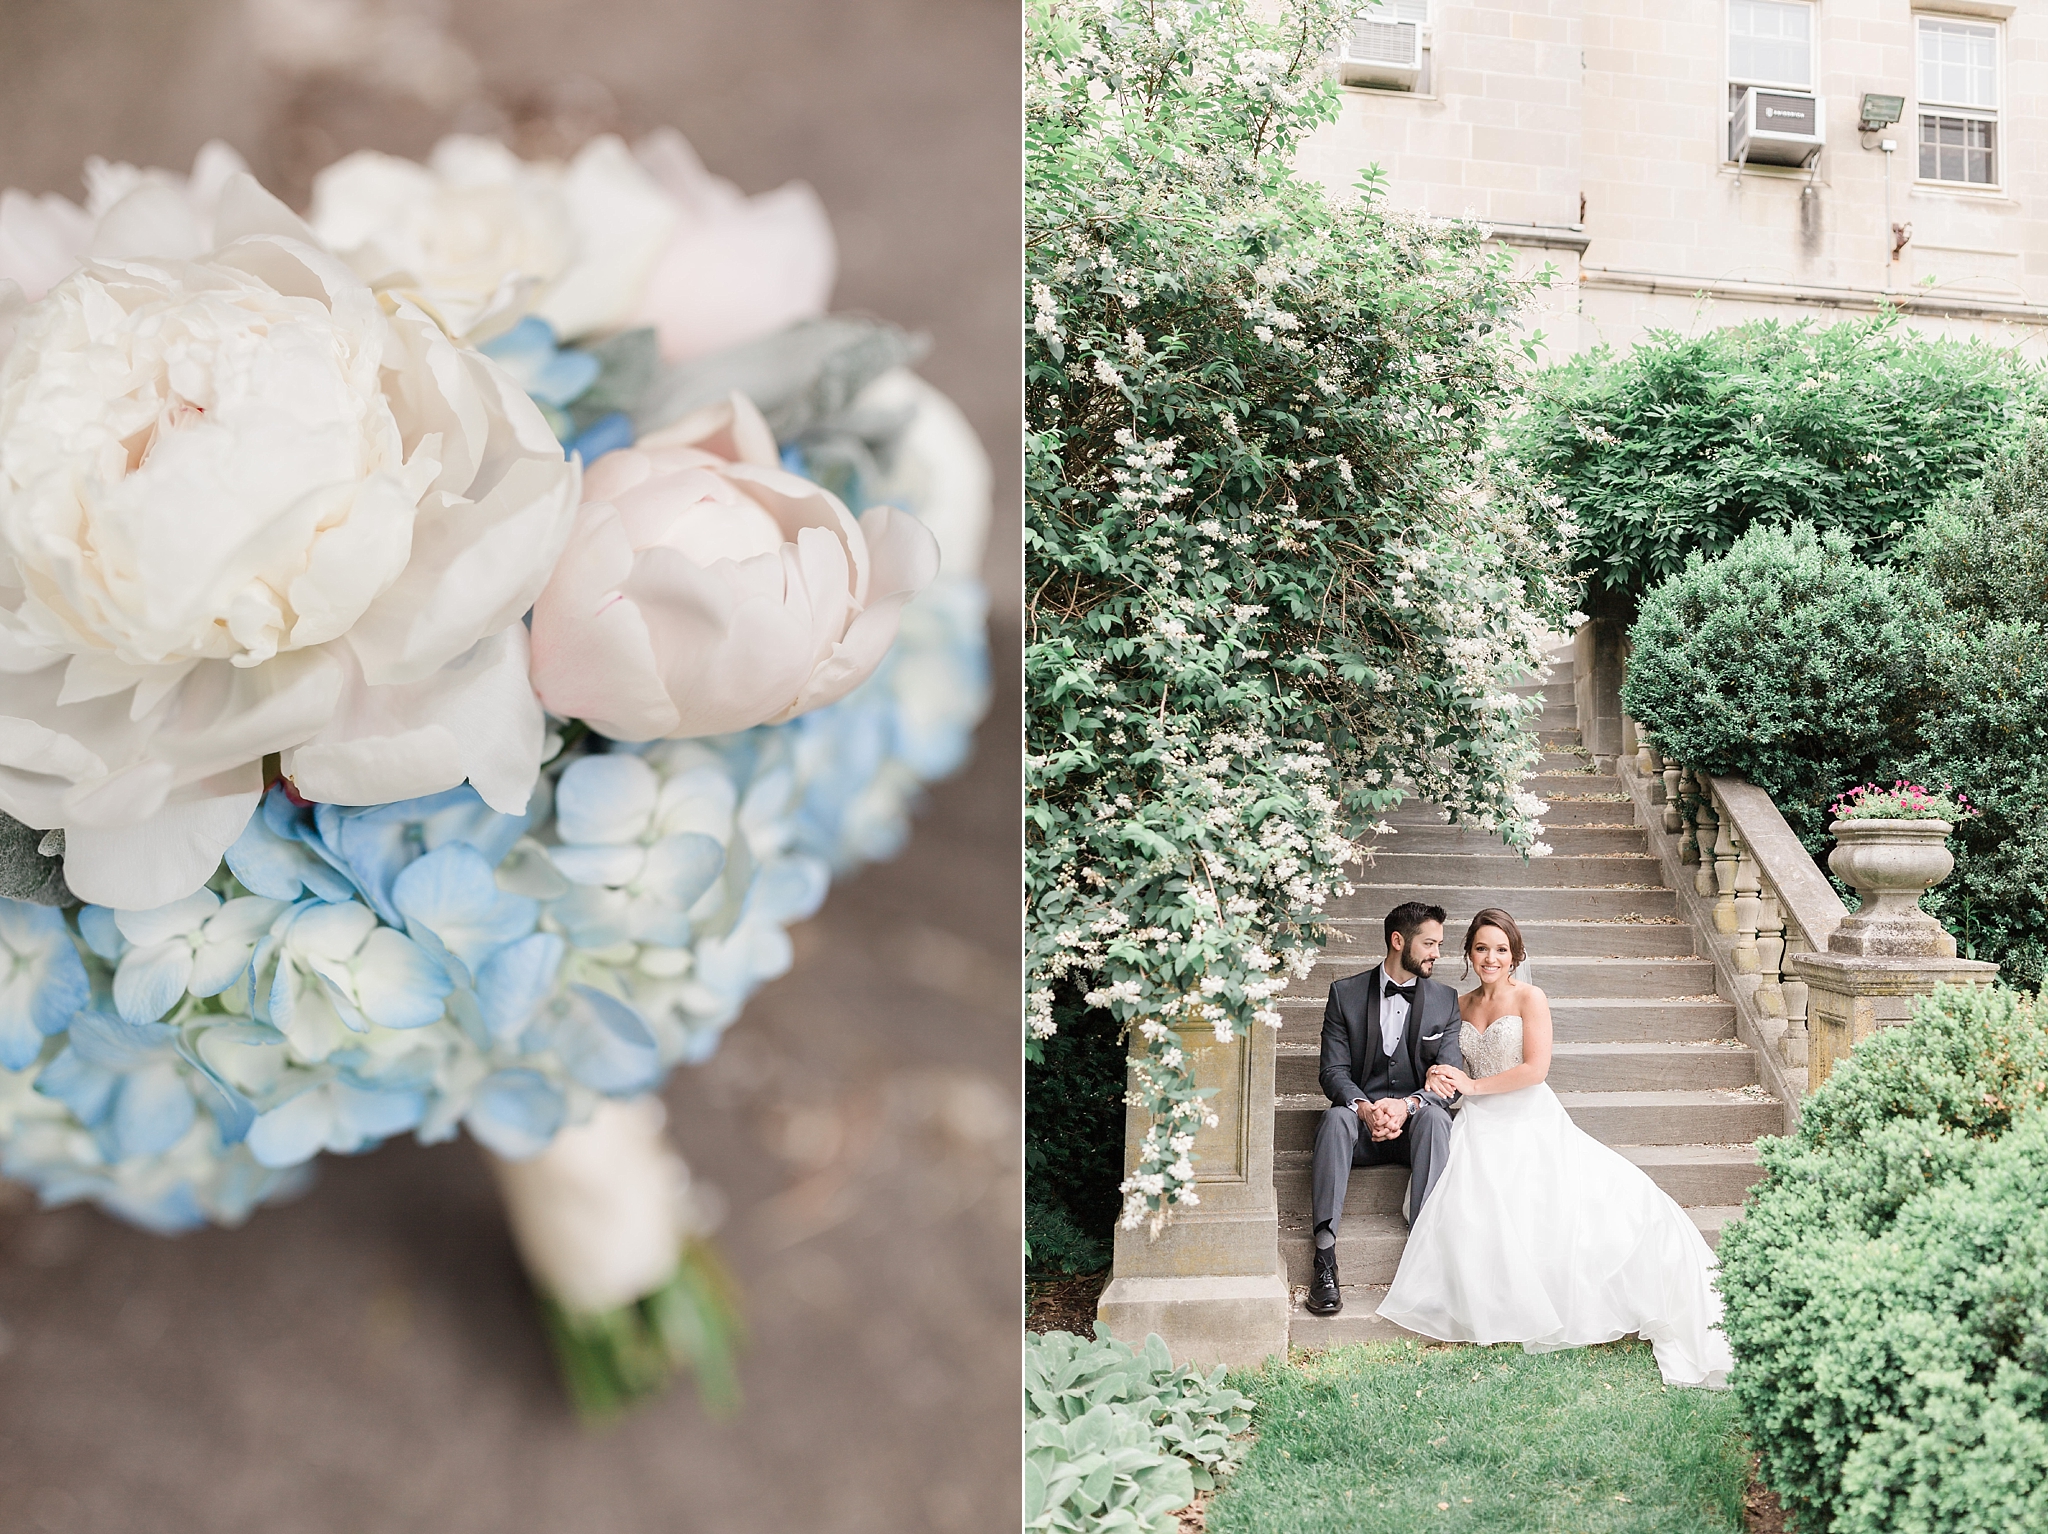 A gorgeous spring wedding is held at Washington, DC's Fairmont Hotel with portraits at Washington National Cathedral.